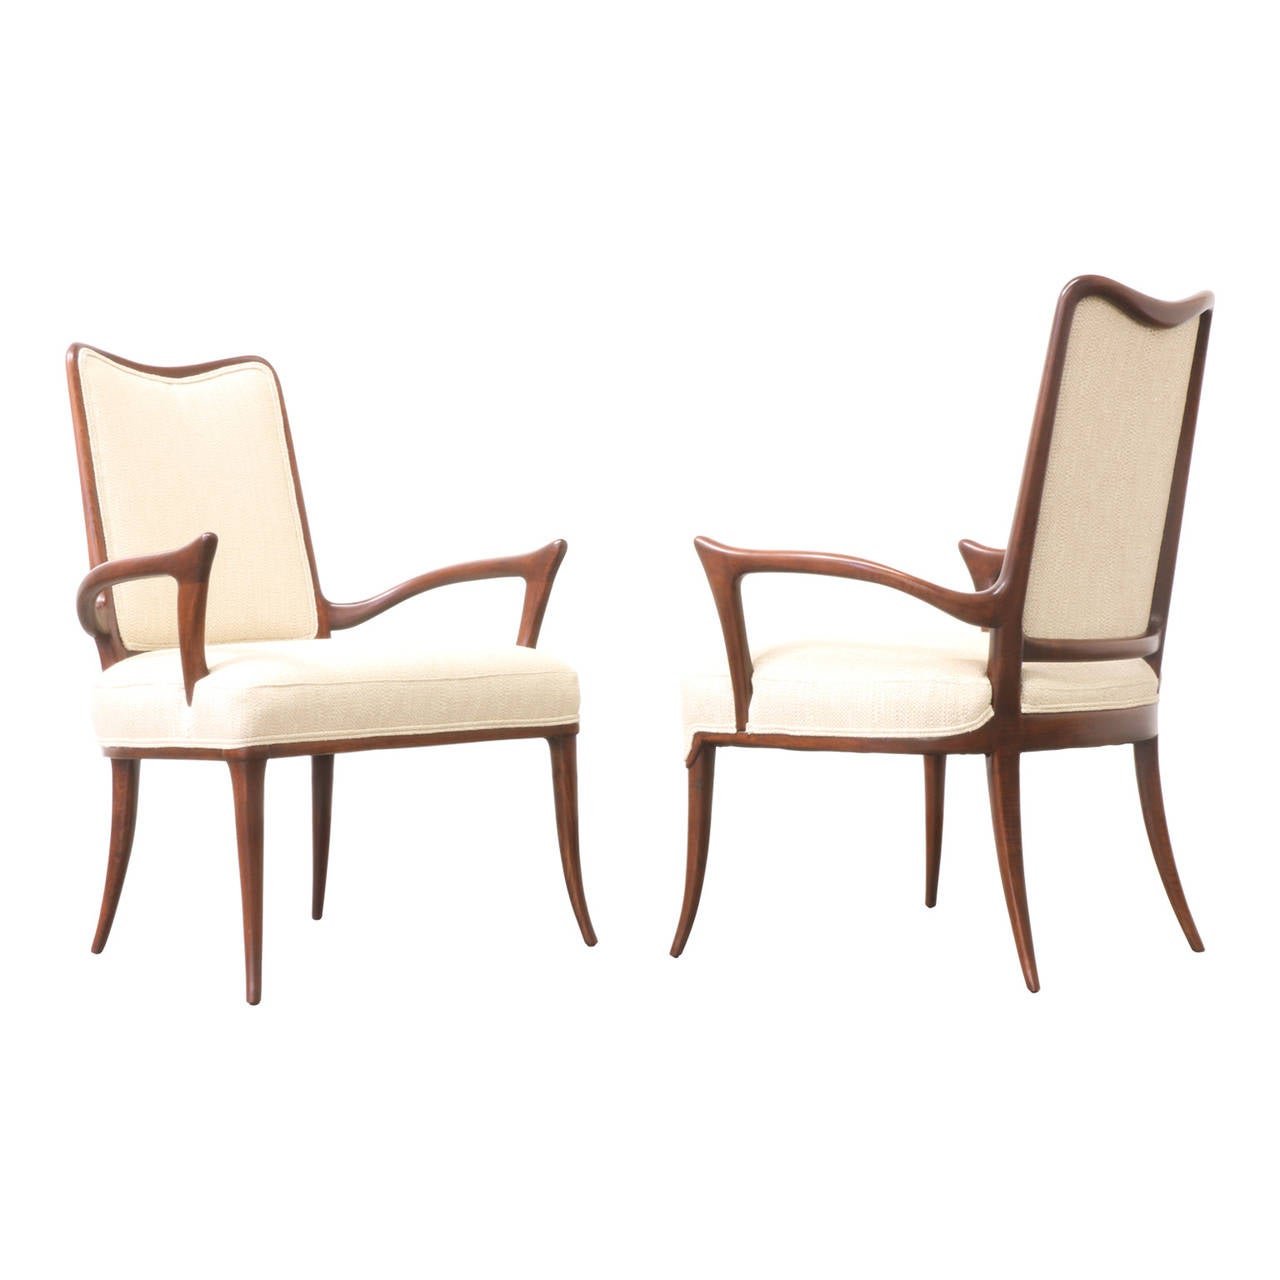 American Midcentury Sculpted Walnut Armchairs